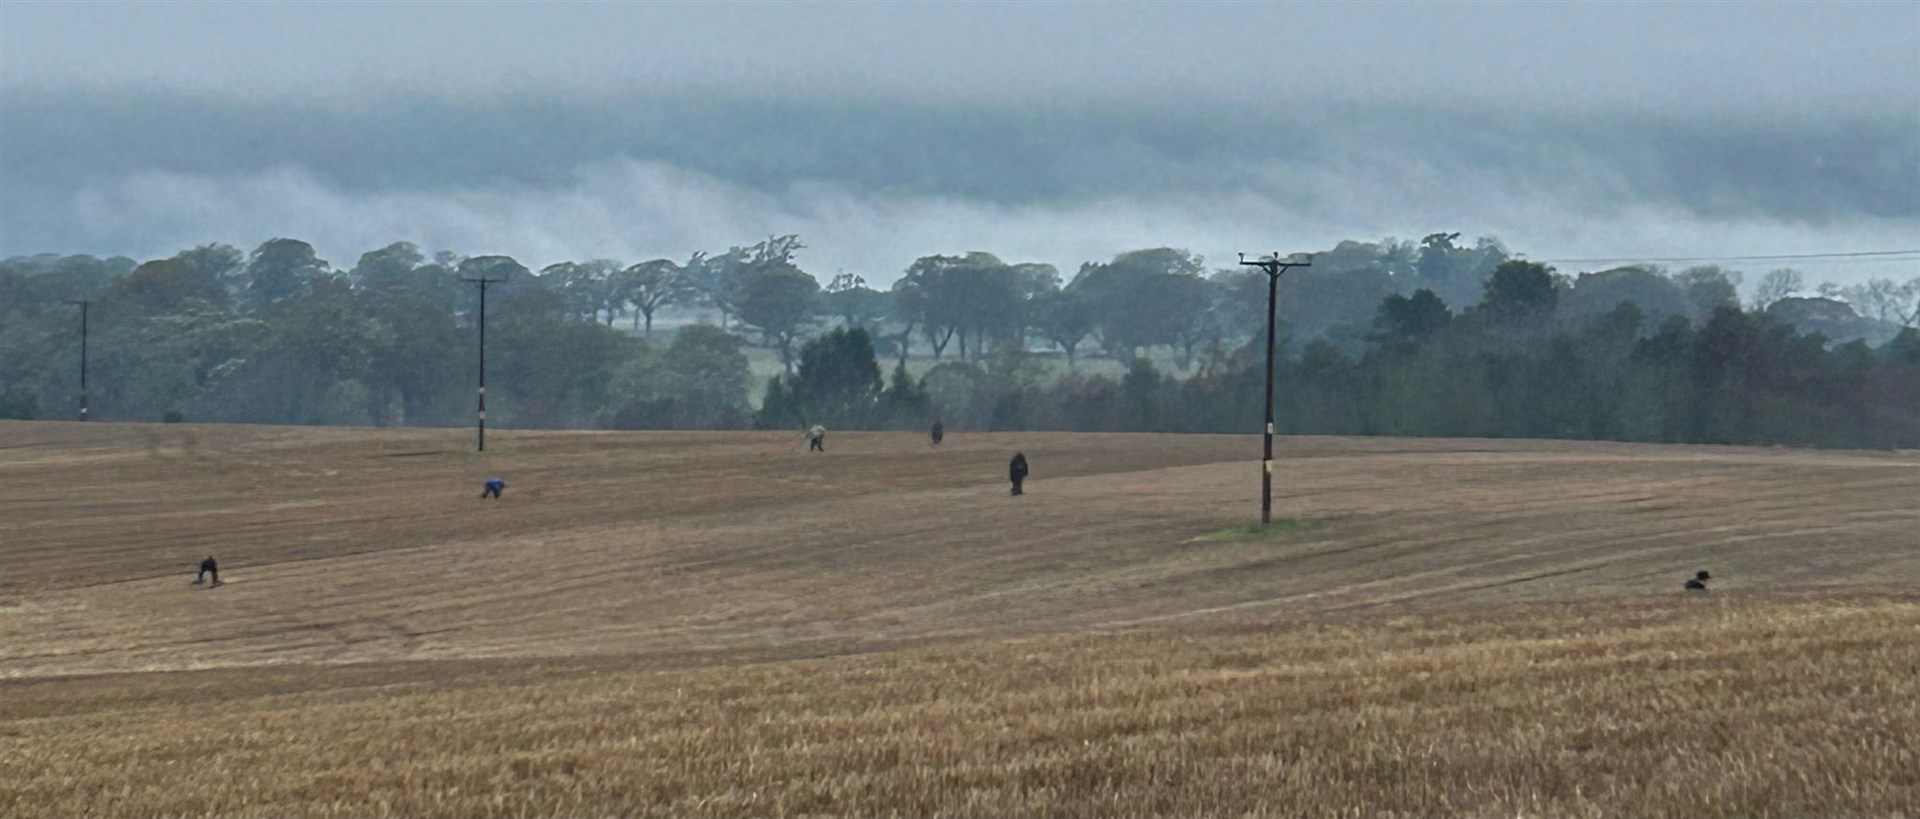 A stubble field with detectors busy scanning.